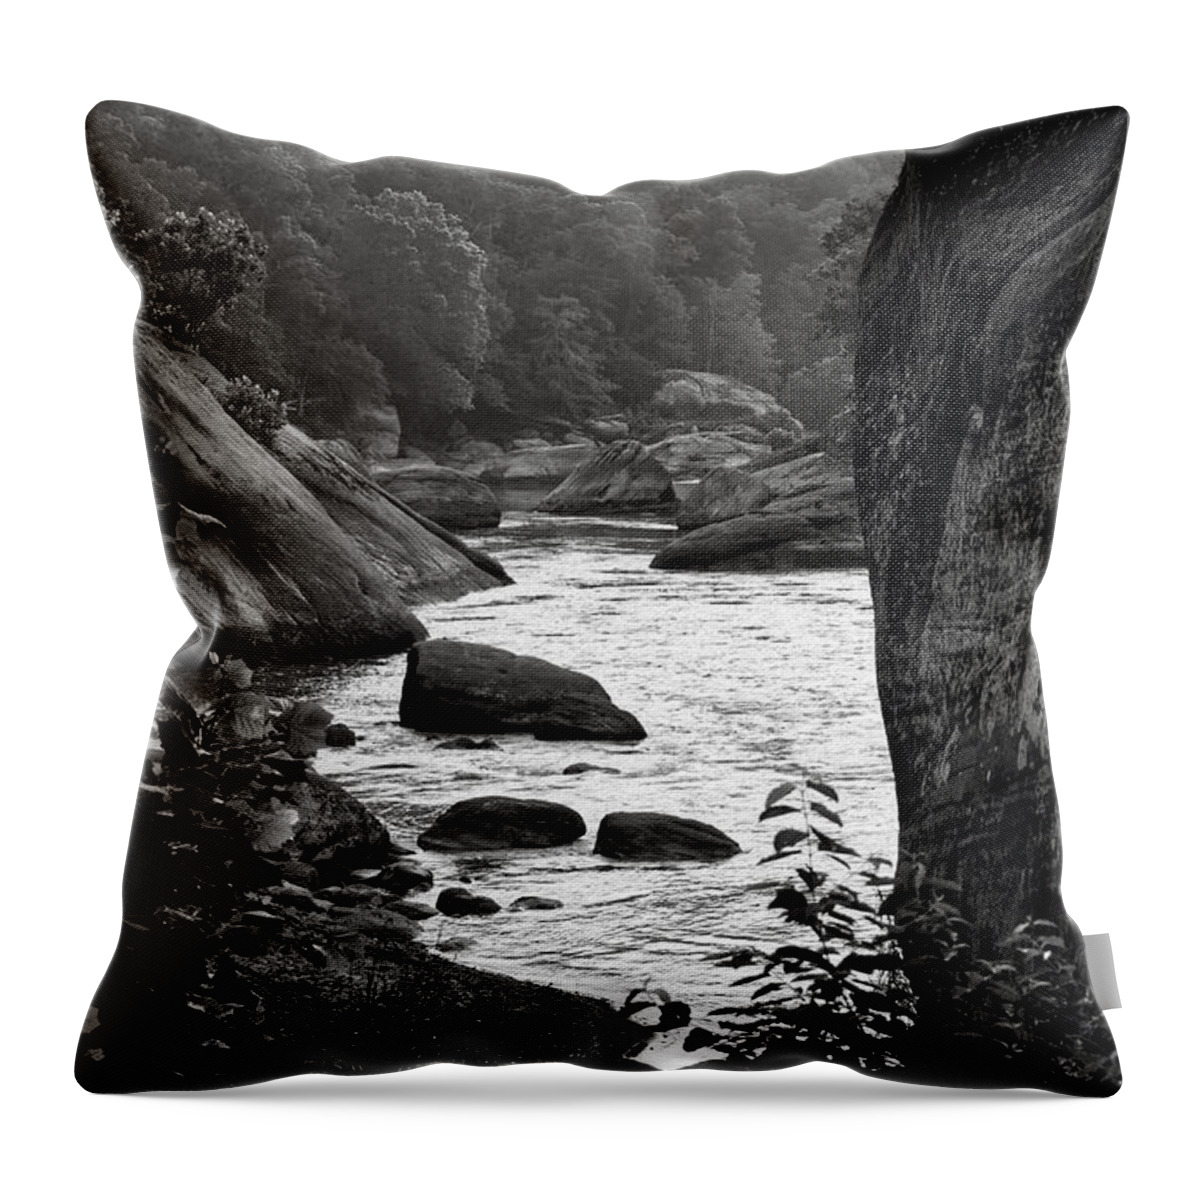 Boulders Throw Pillow featuring the photograph Black And White Cumberland River by Phil Perkins